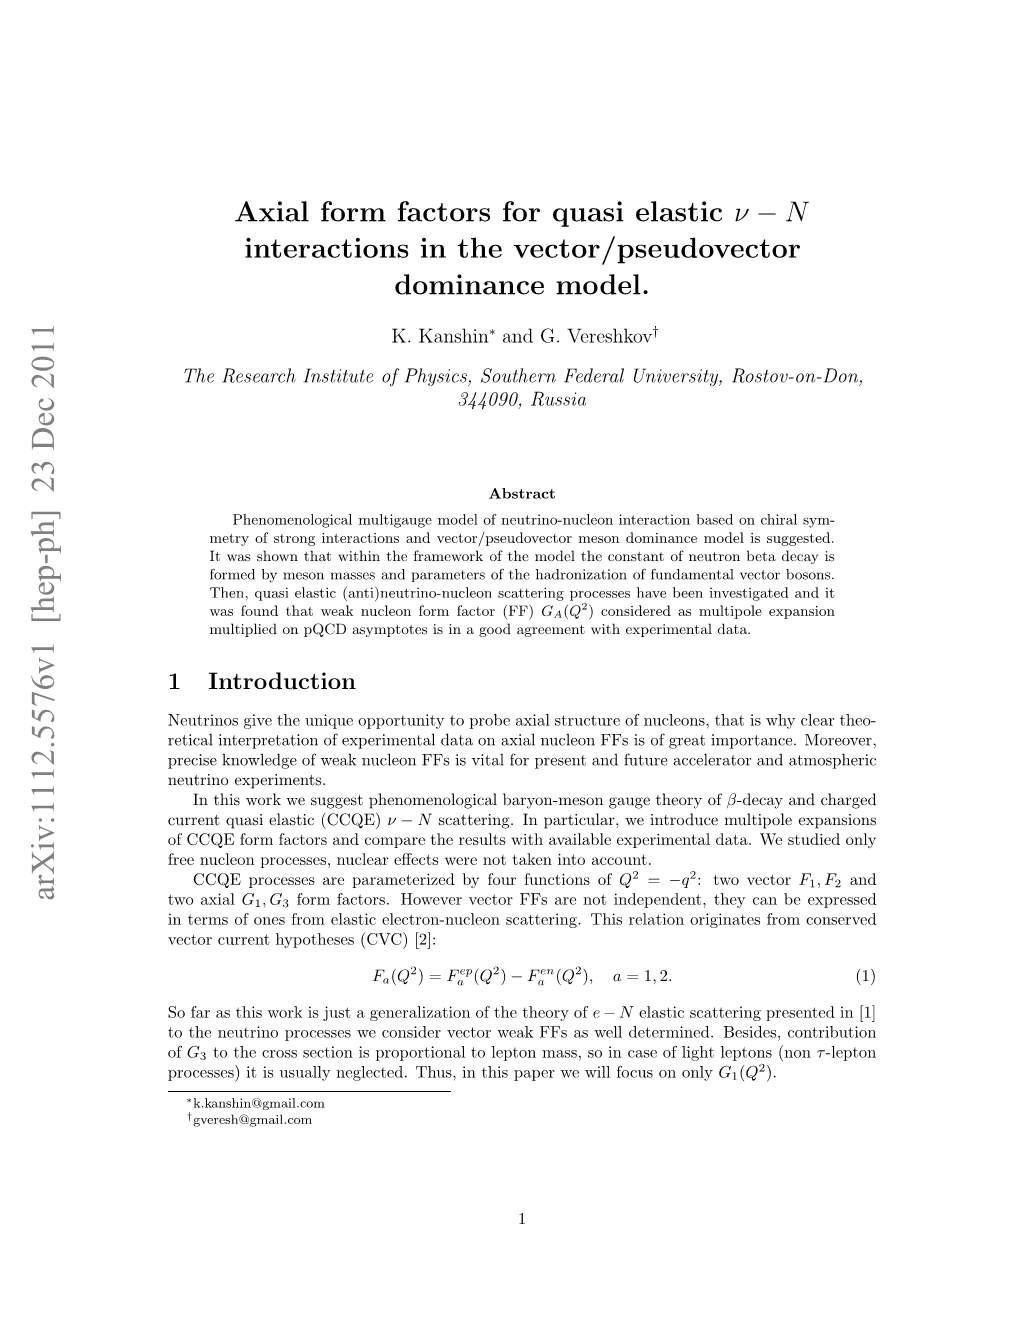 Axial Form Factors for Quasi Elastic\Nu-N Interactions in the Vector/Pseudovector Dominance Model